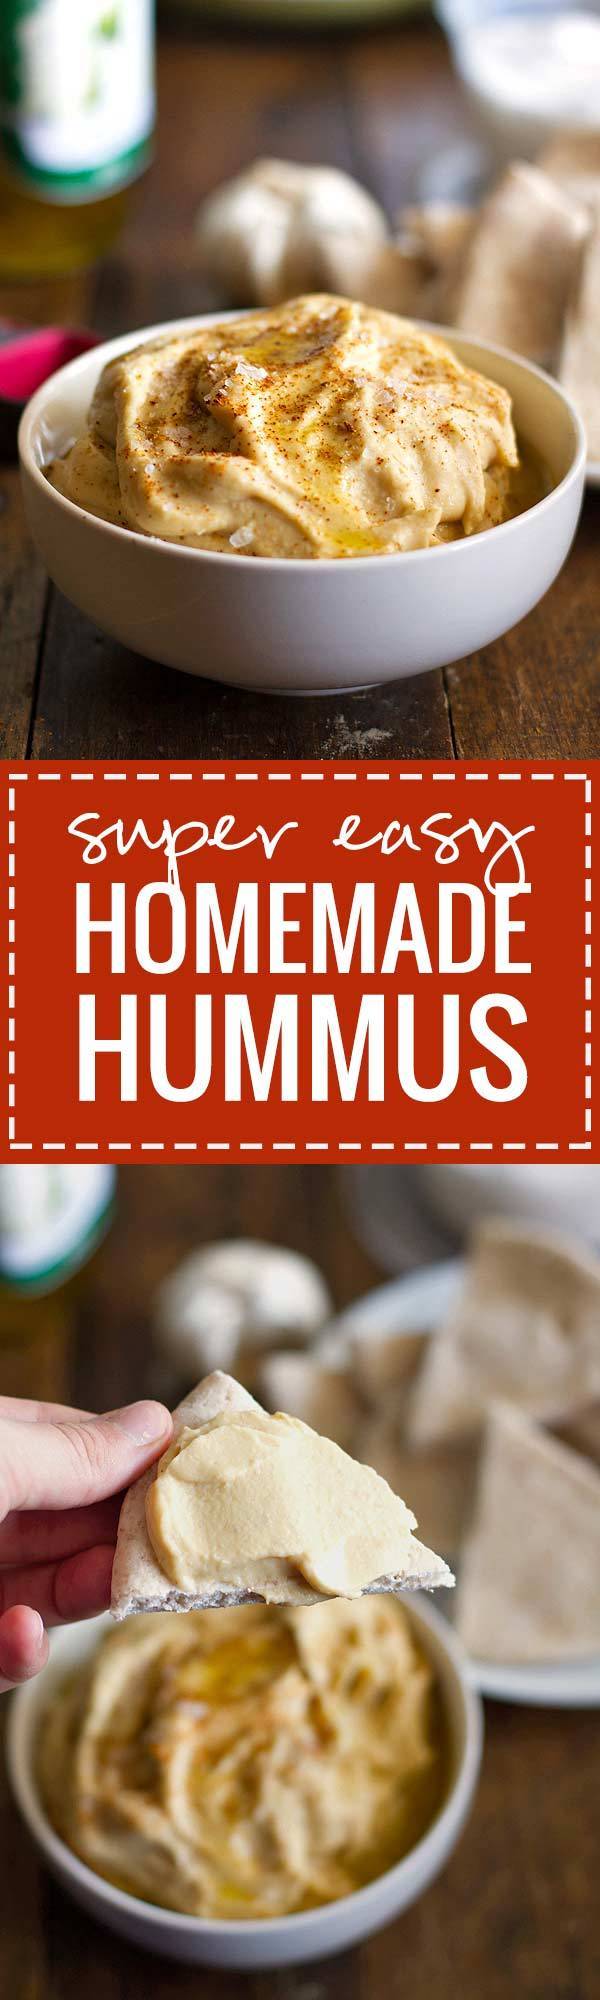 Super Easy Homemade Hummus - This hummus is simple and blended with fresh ingredients | pinchofyum.com